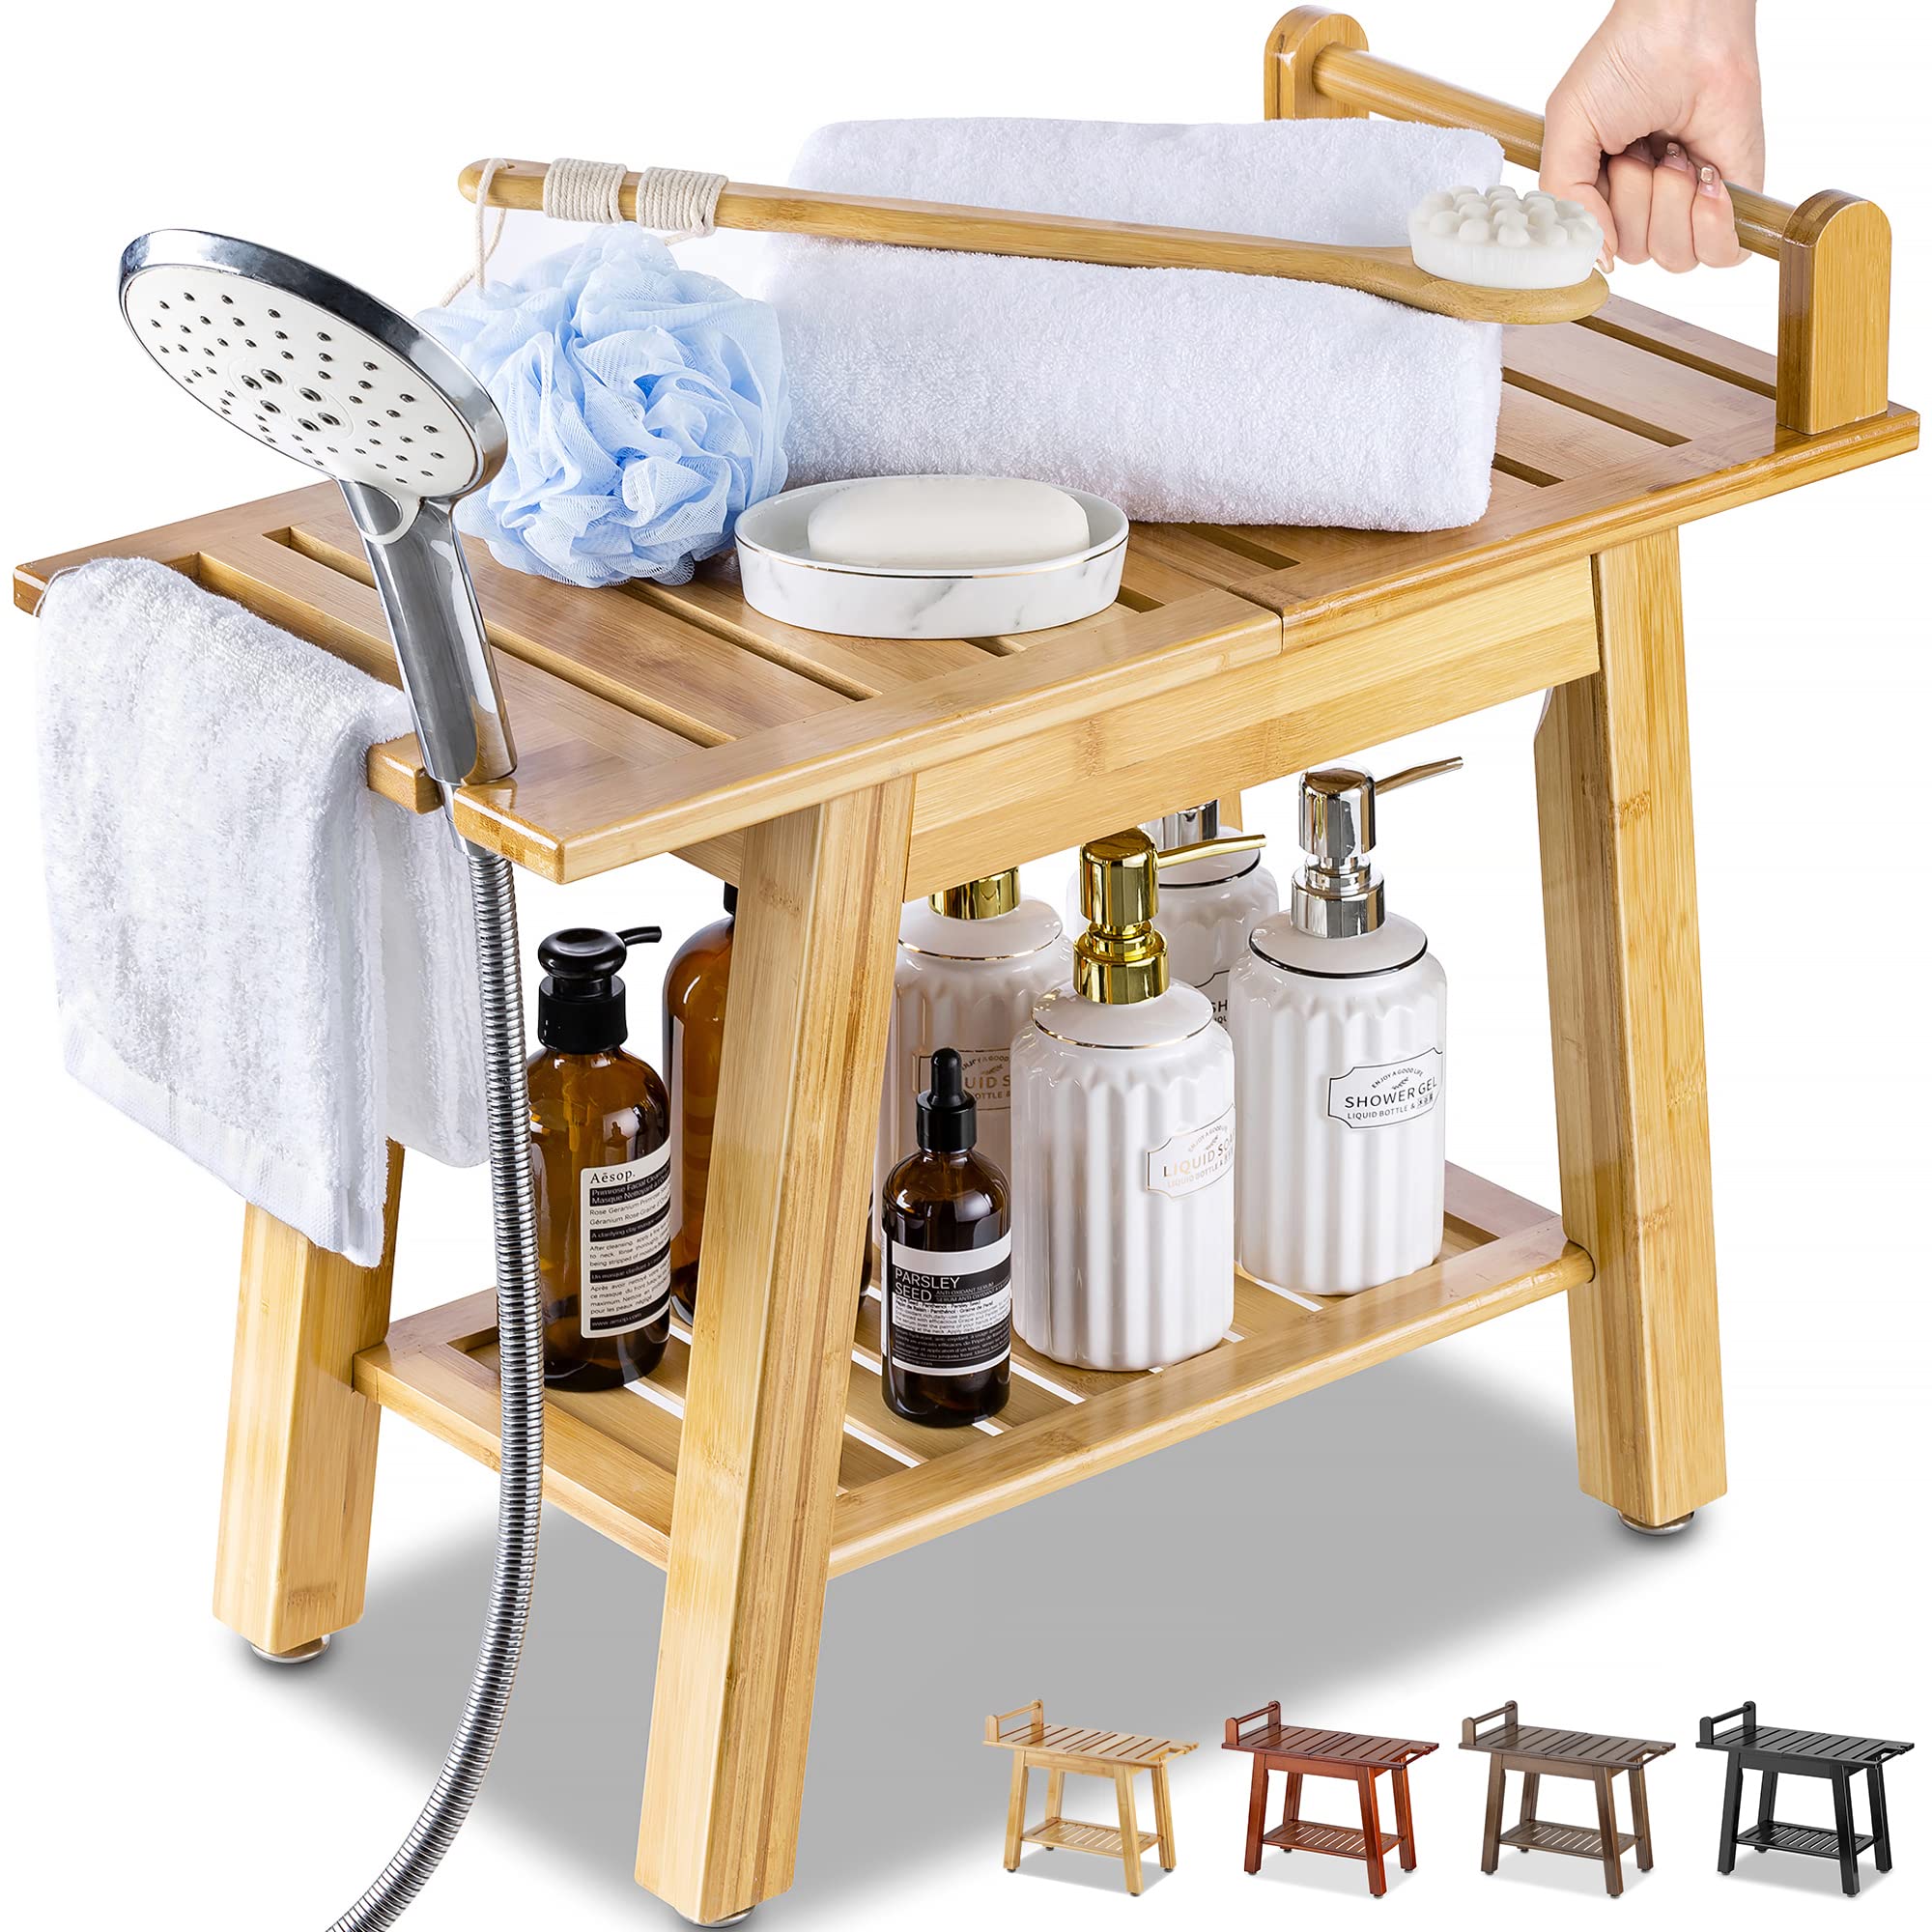 ETECHMART 2-Tier Bamboo Shower Bench, 24 Inch Spa Stool with Storage Shelf  for Inside Shower Legs Shaving, Entryway or Bathroom, A-Shaped Shower Bath  Seat for Seniors Adults Disabled Women, Natural 24×20×12 Inch+Bamboo